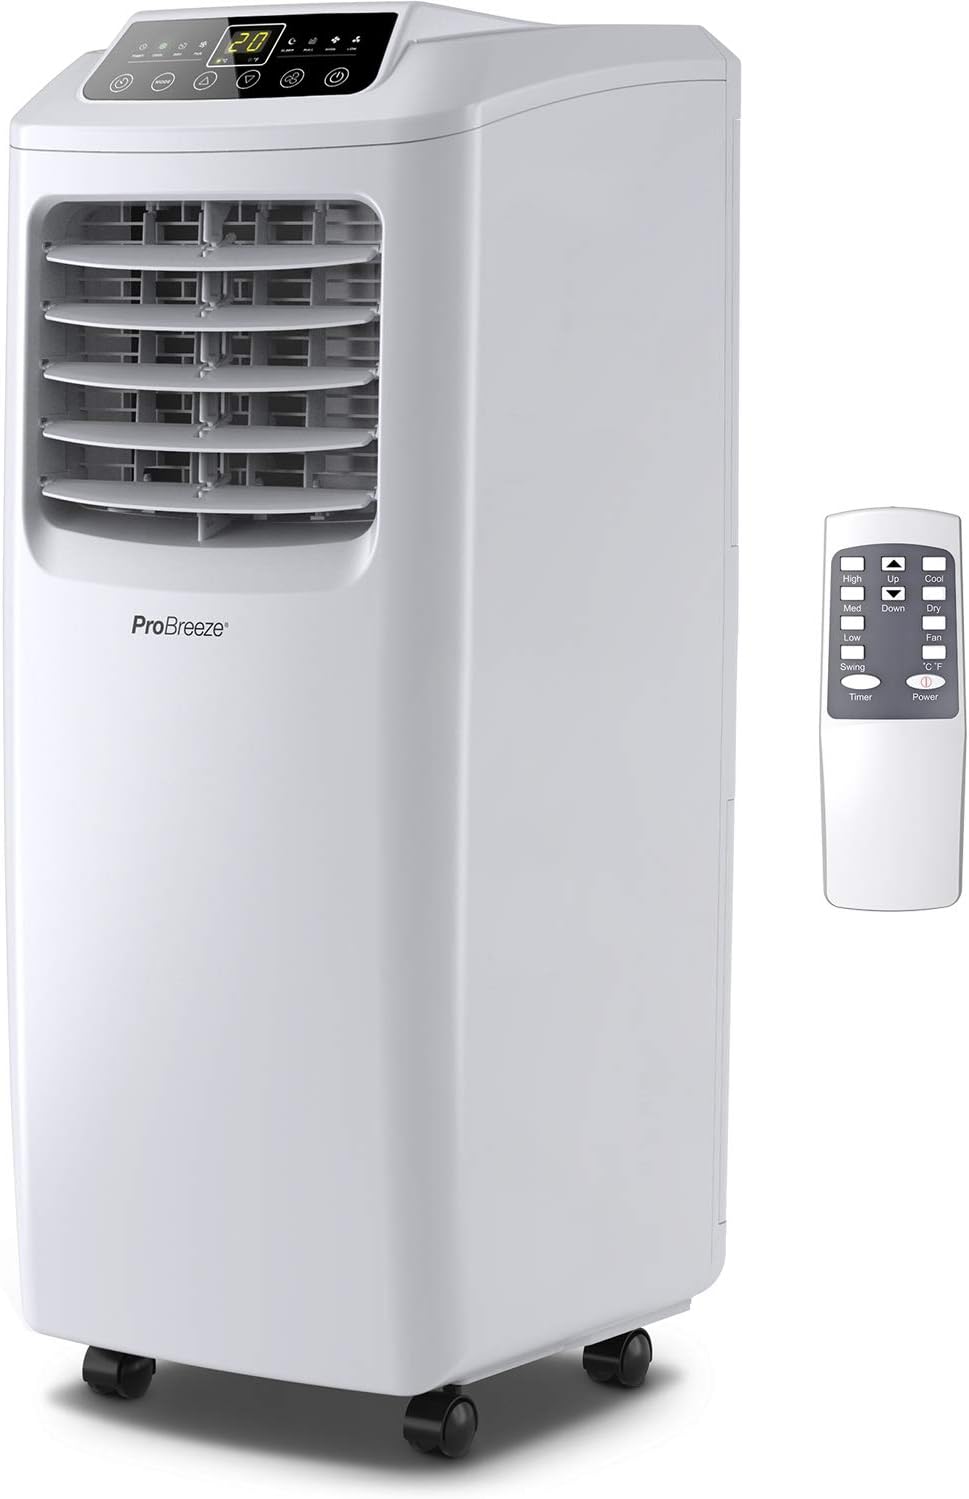 Pro Breeze 4-in-1 Portable Air Conditioner 9000 BTU with Remote Control, 24 Hour Timer & Window Venting Kit Included. Powerful Air Conditioning Unit with Class A Energy Efficiency Rating